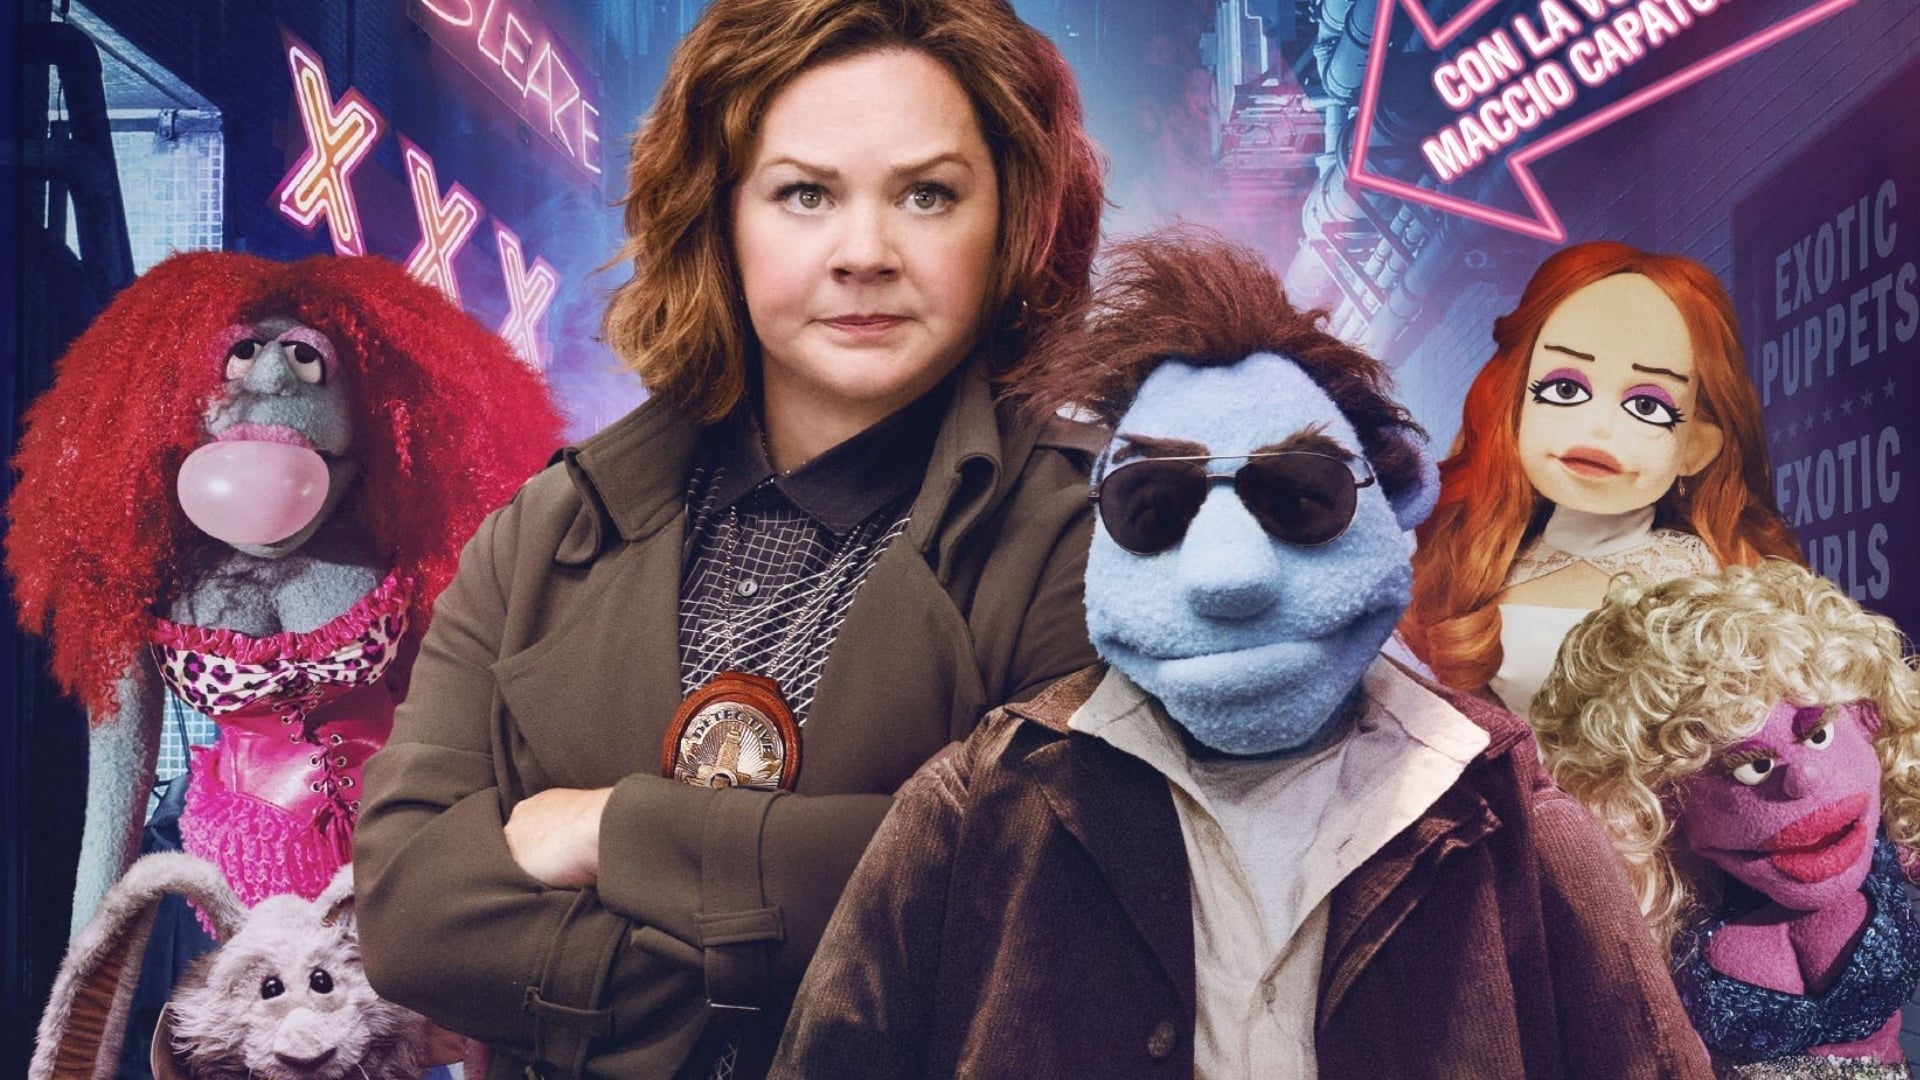 The Happytime Murders Free Movie Download